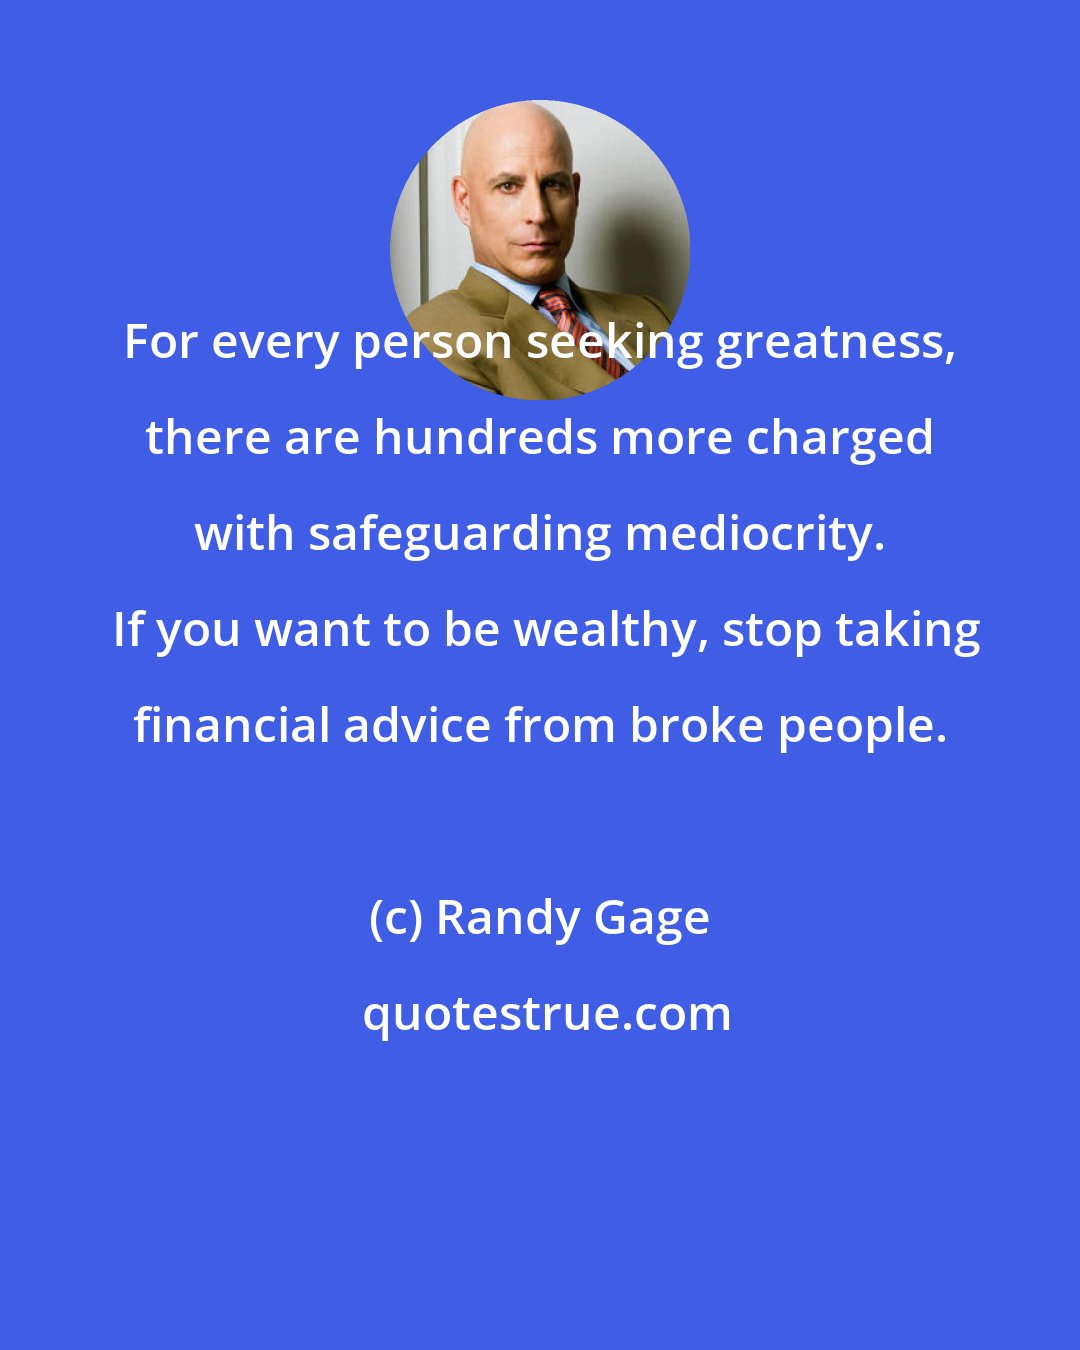 Randy Gage: For every person seeking greatness, there are hundreds more charged with safeguarding mediocrity.  If you want to be wealthy, stop taking financial advice from broke people.